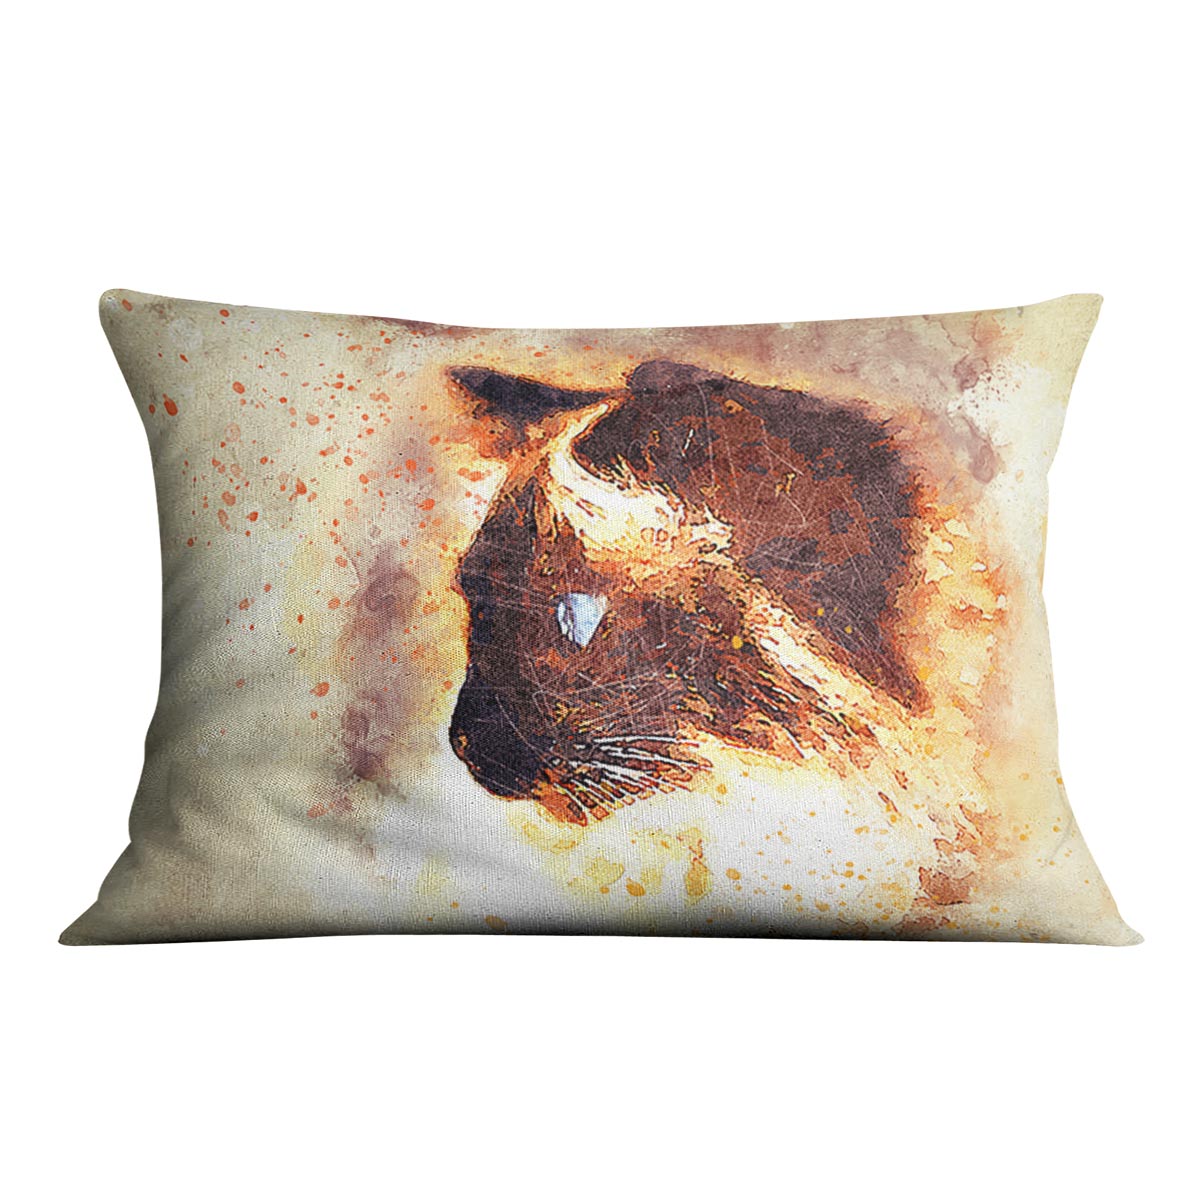 Fire Cat Painting Cushion